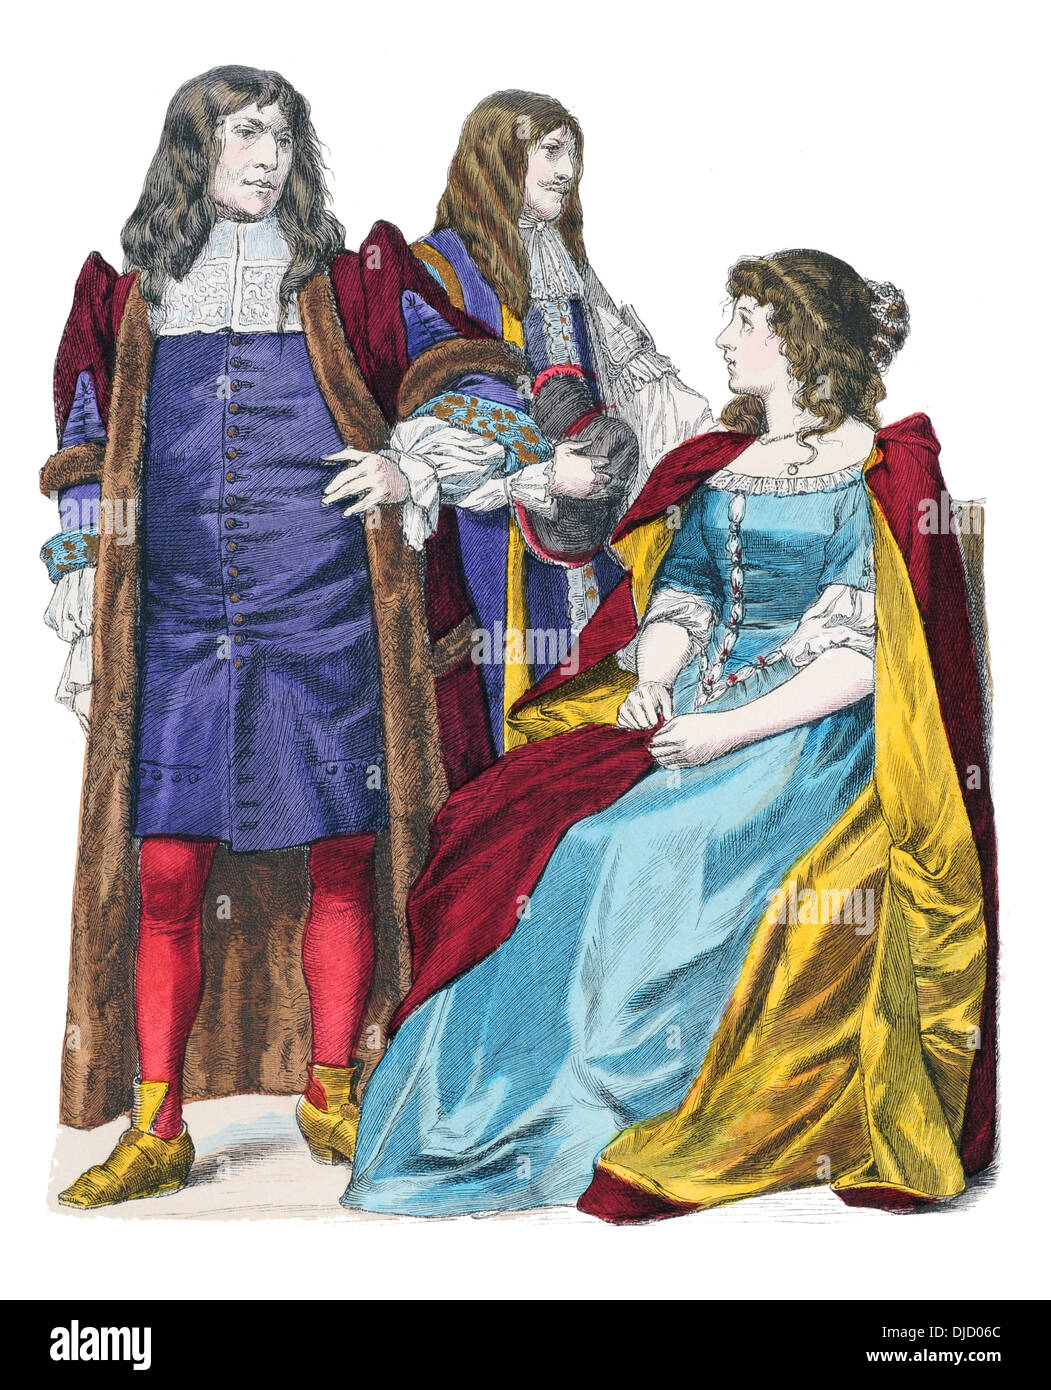 17th century XVII English Nobility (L to R) Bethel Slingsby Sheriff of London, Cavalier of Charles II and Duchess of Cleveland Stock Photo